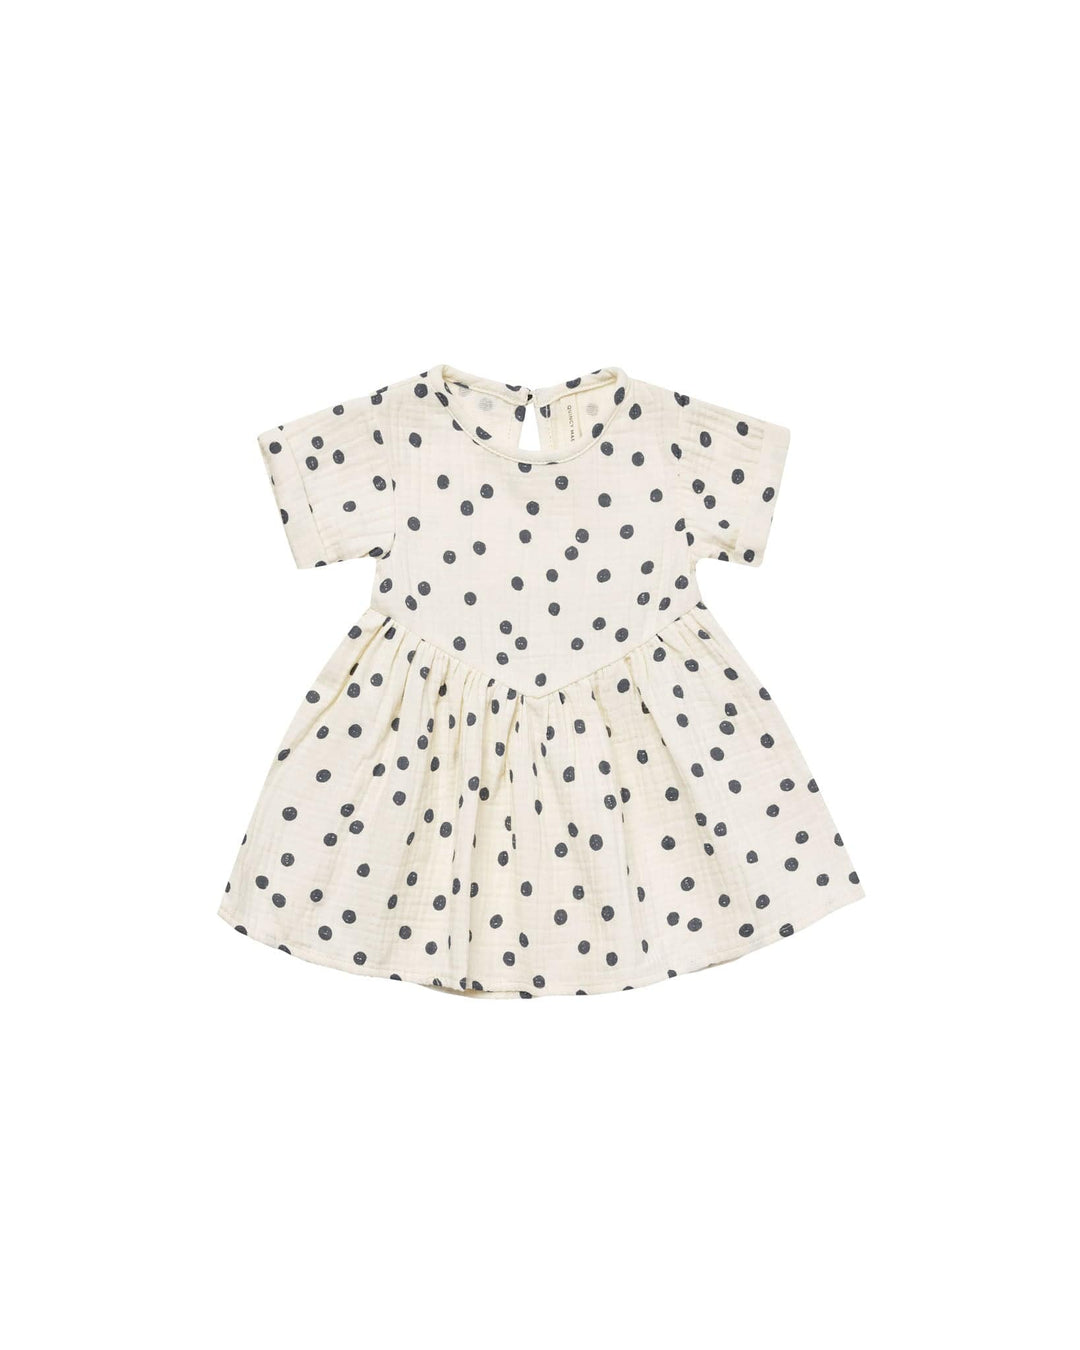 Quincy Mae Baby & Toddler Dresses Brielle Dress - Navy Dot